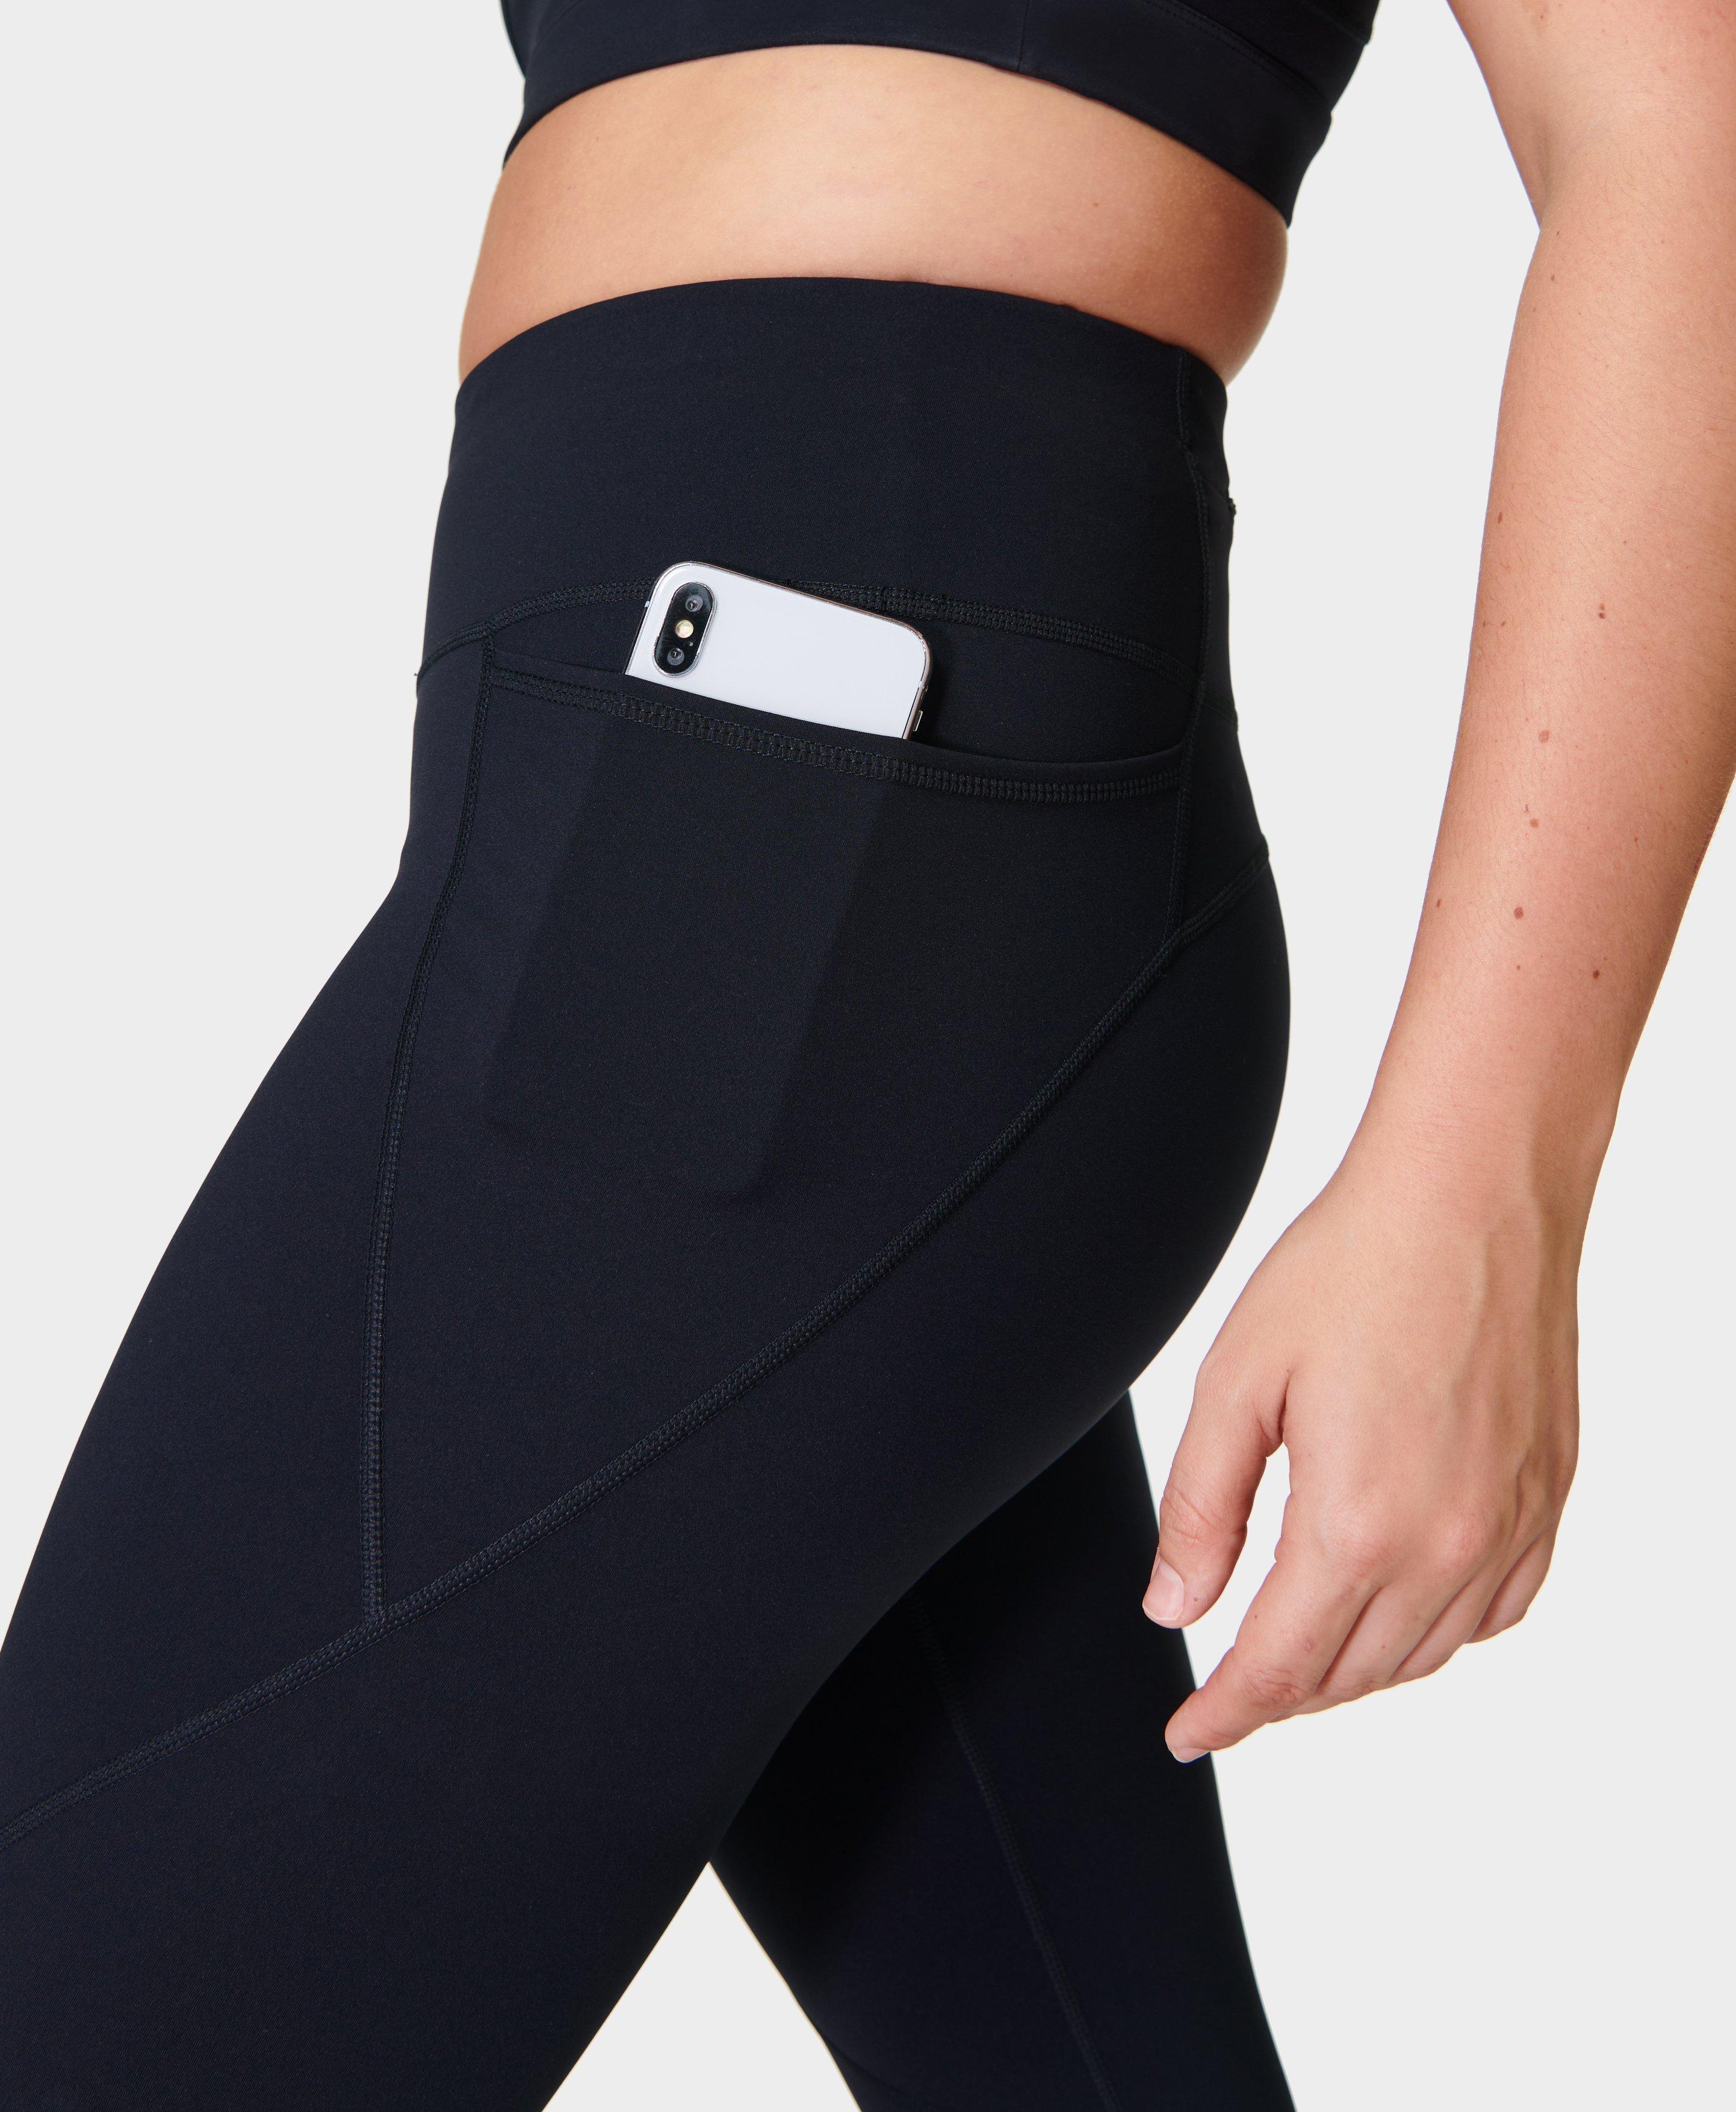 Pants & Jumpsuits  Pockets Compression Leggings Fitness Tight